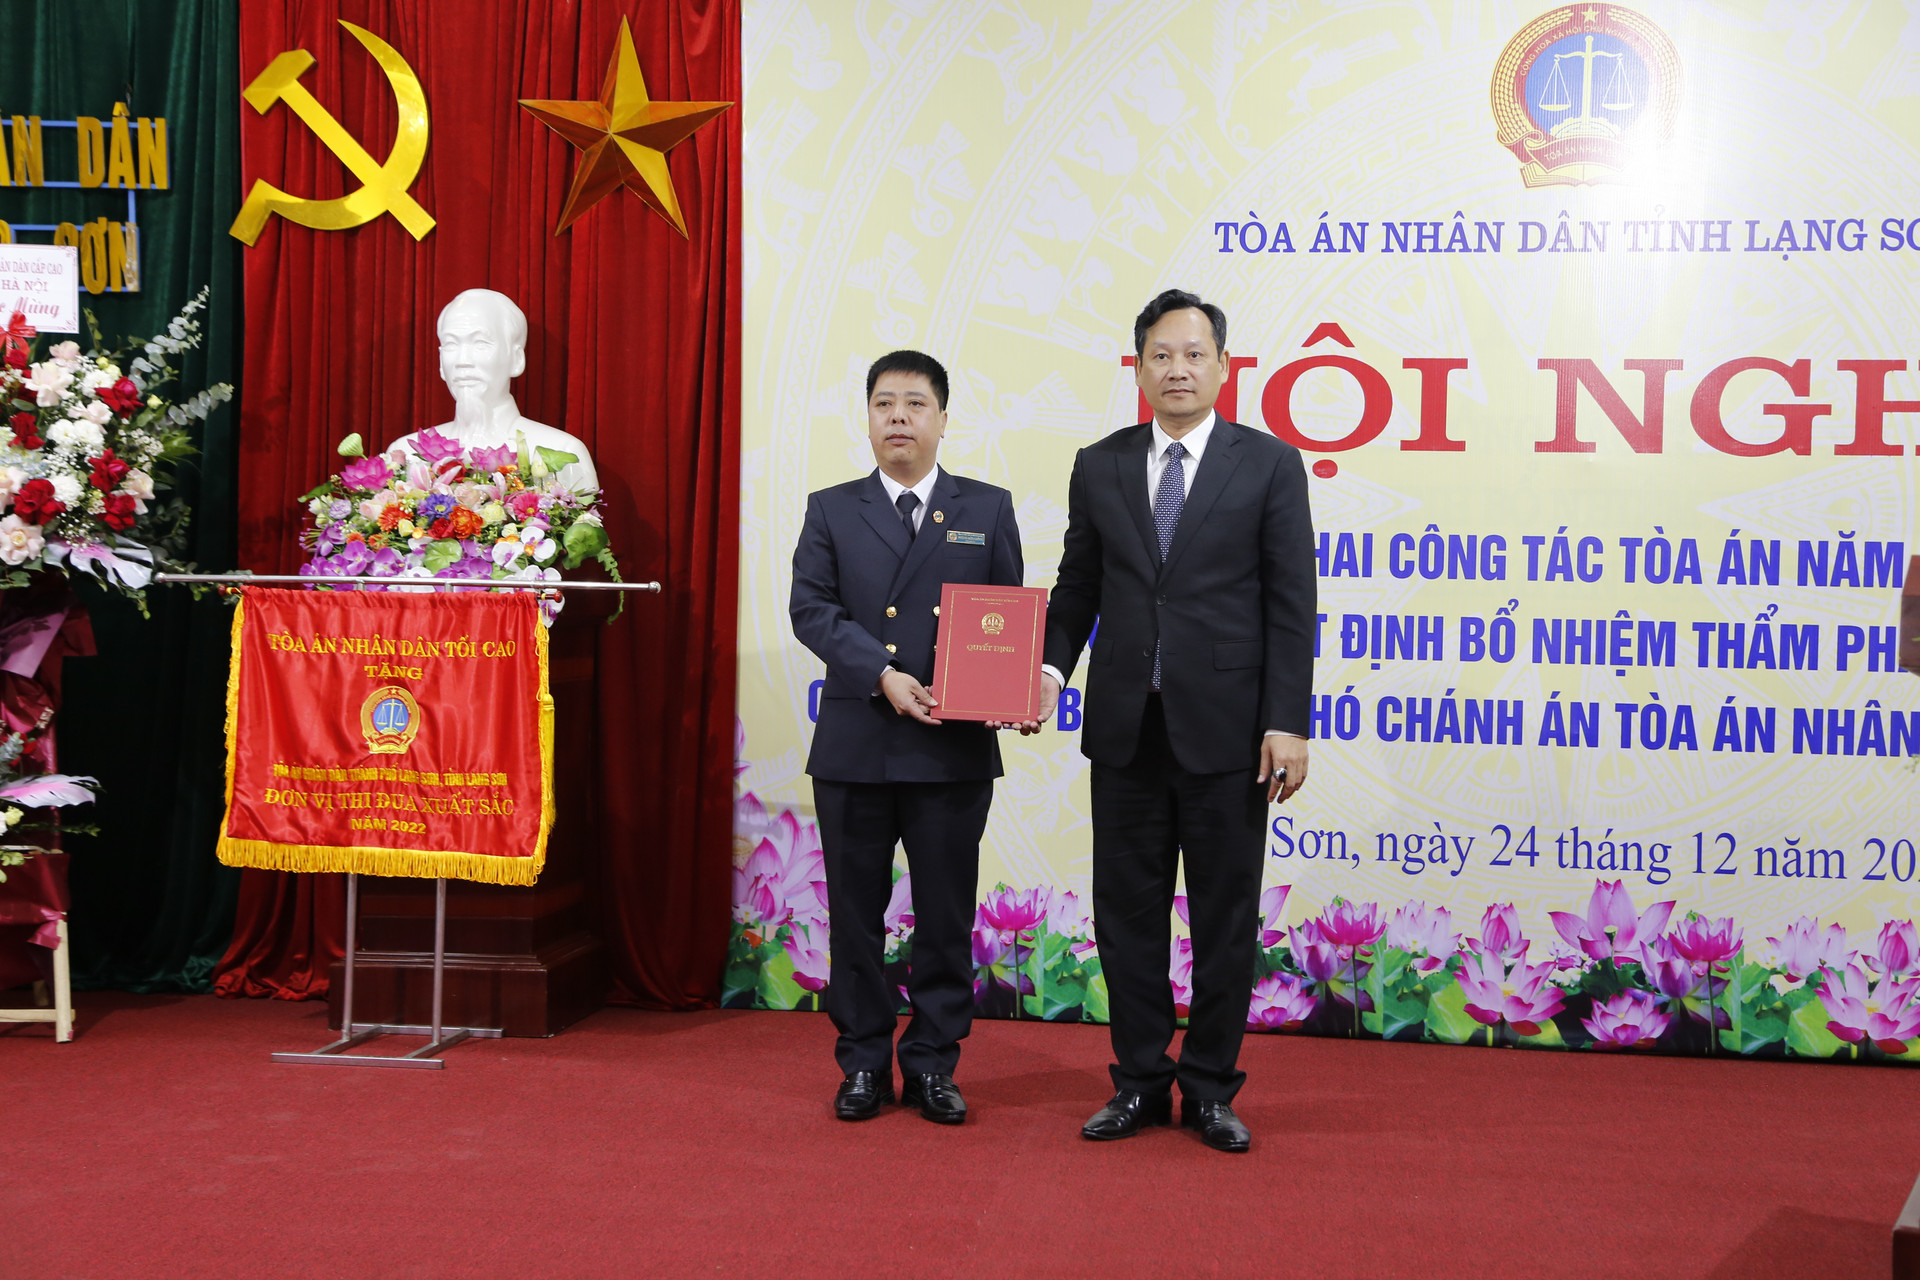 anh-3-sep-tien-trao-quyet-dinh.jpg